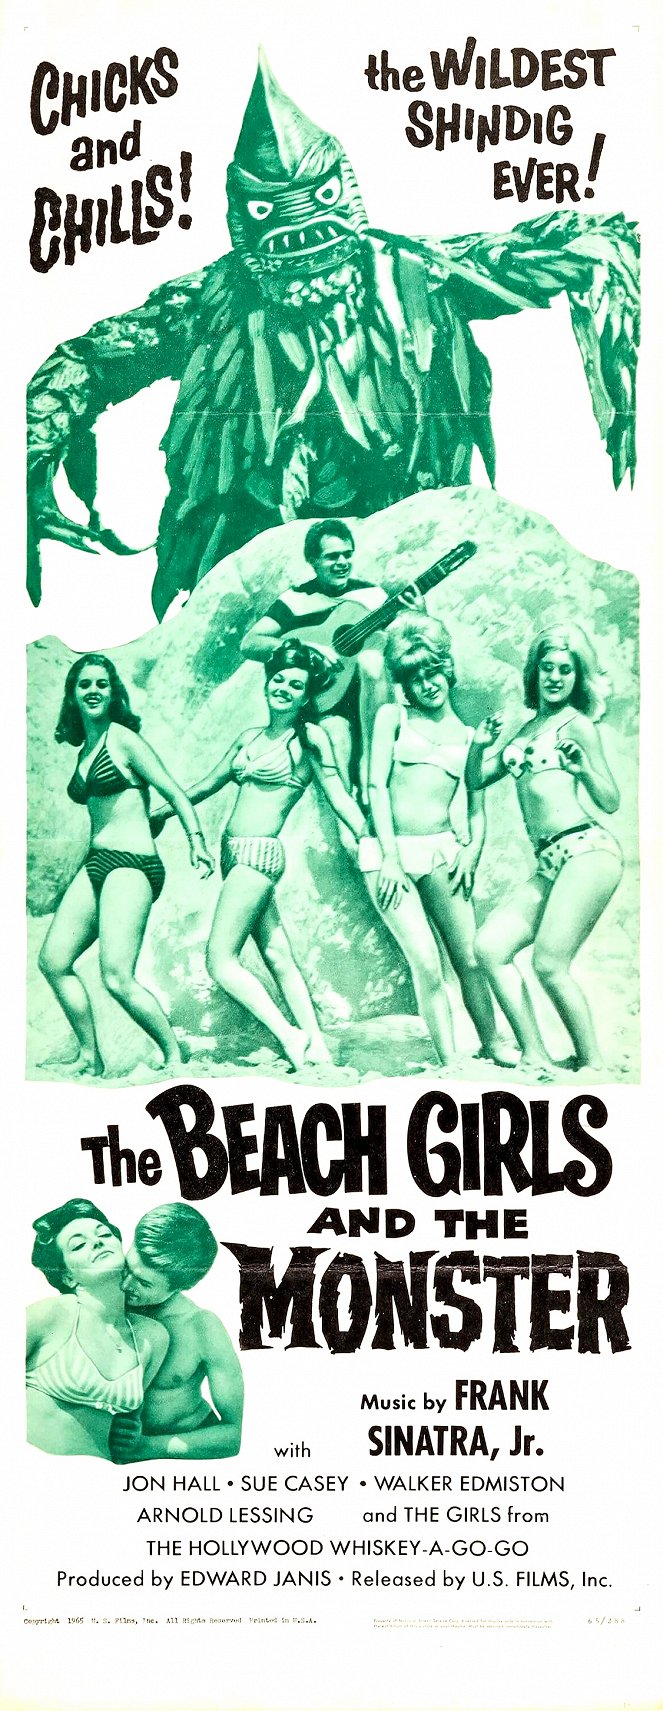 The Beach Girls and the Monster - Posters